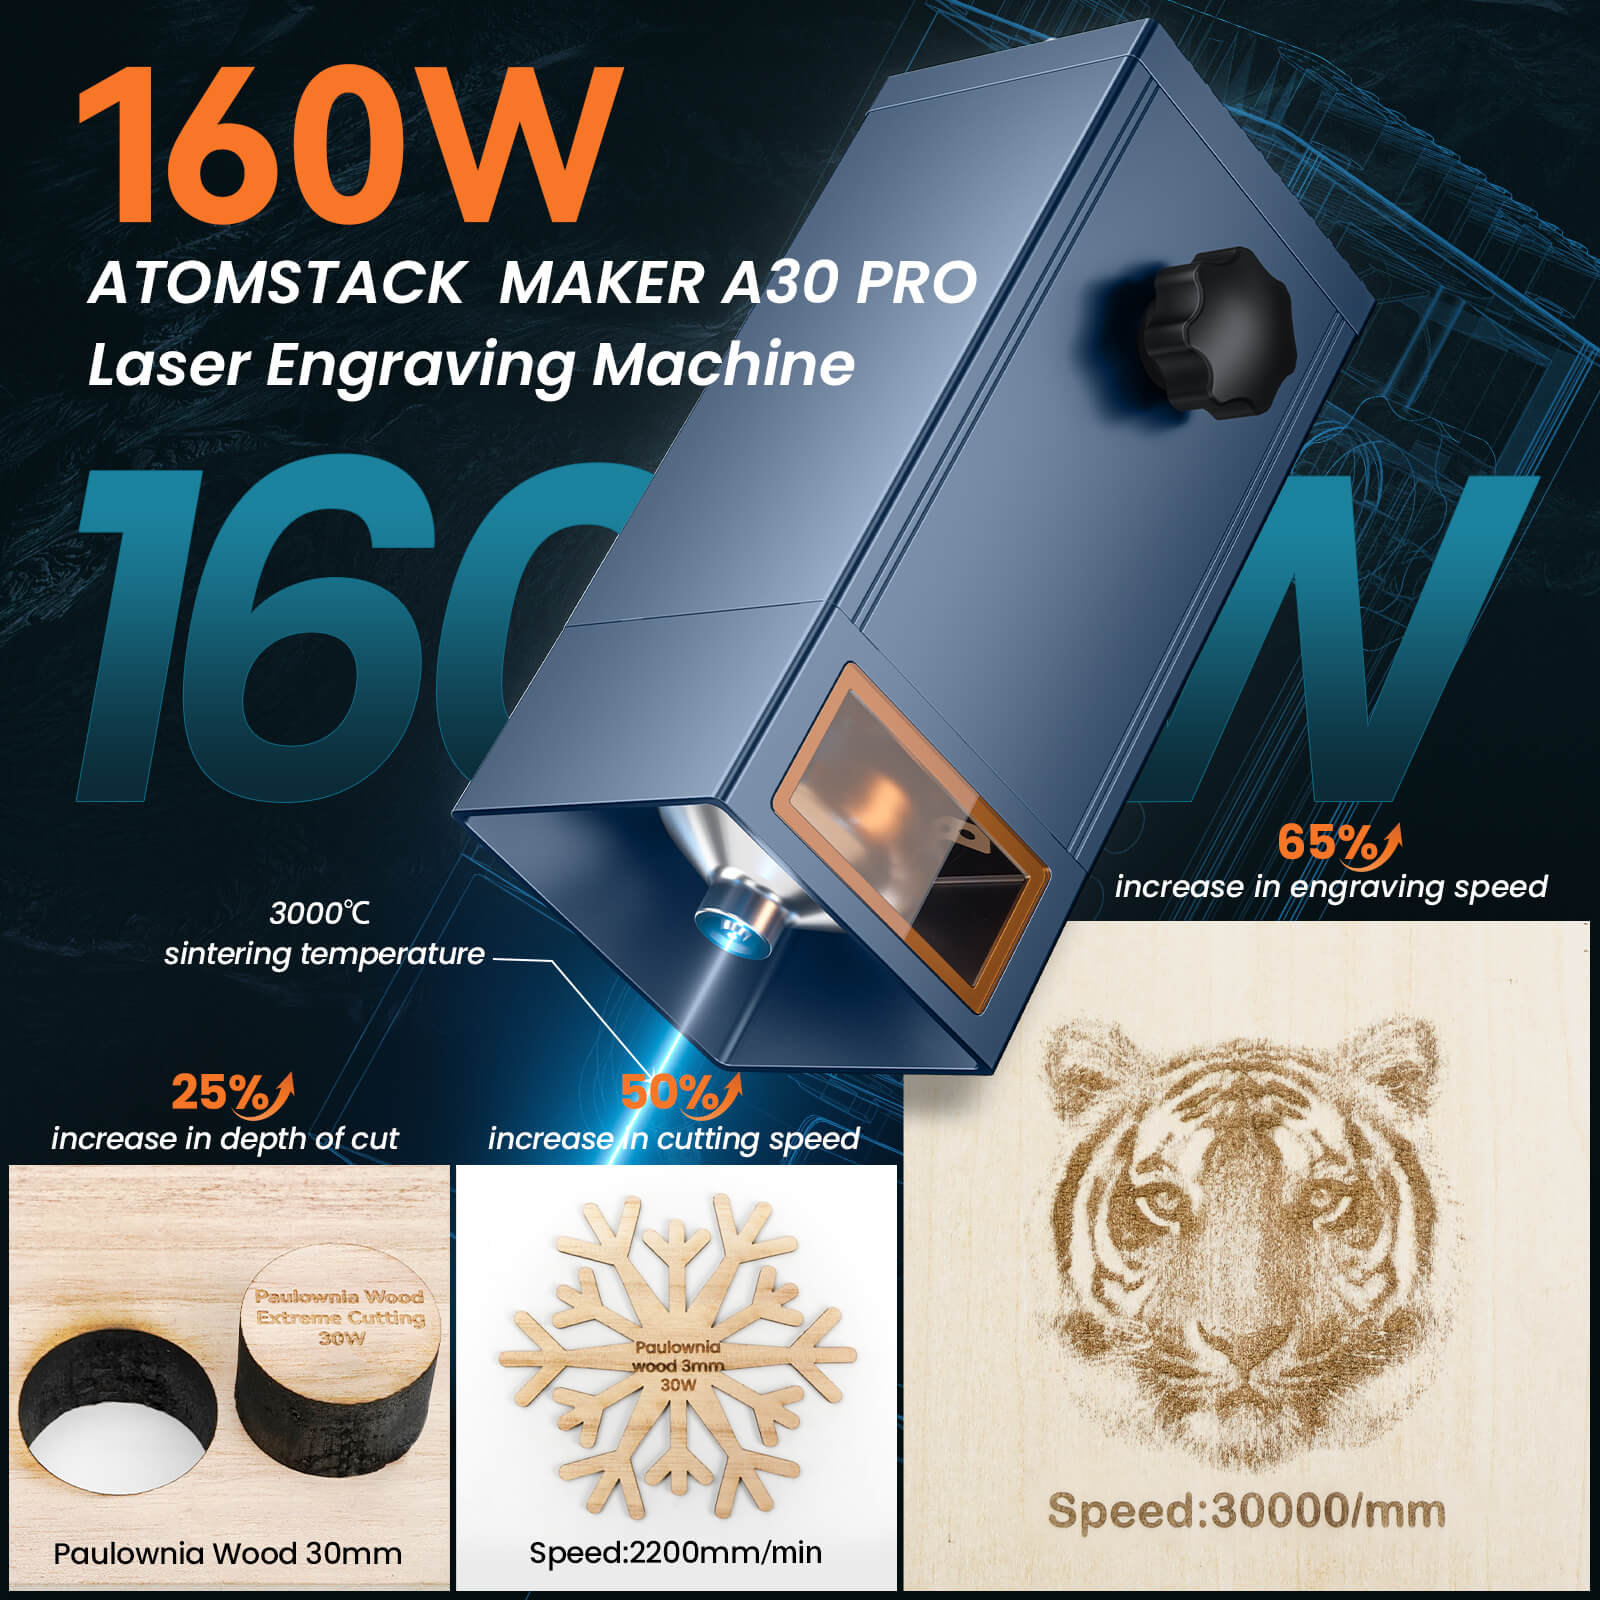 AtomStack A30 Pro 160W Laser Engraving and Cutting Machine with F60 Air Assist Kit